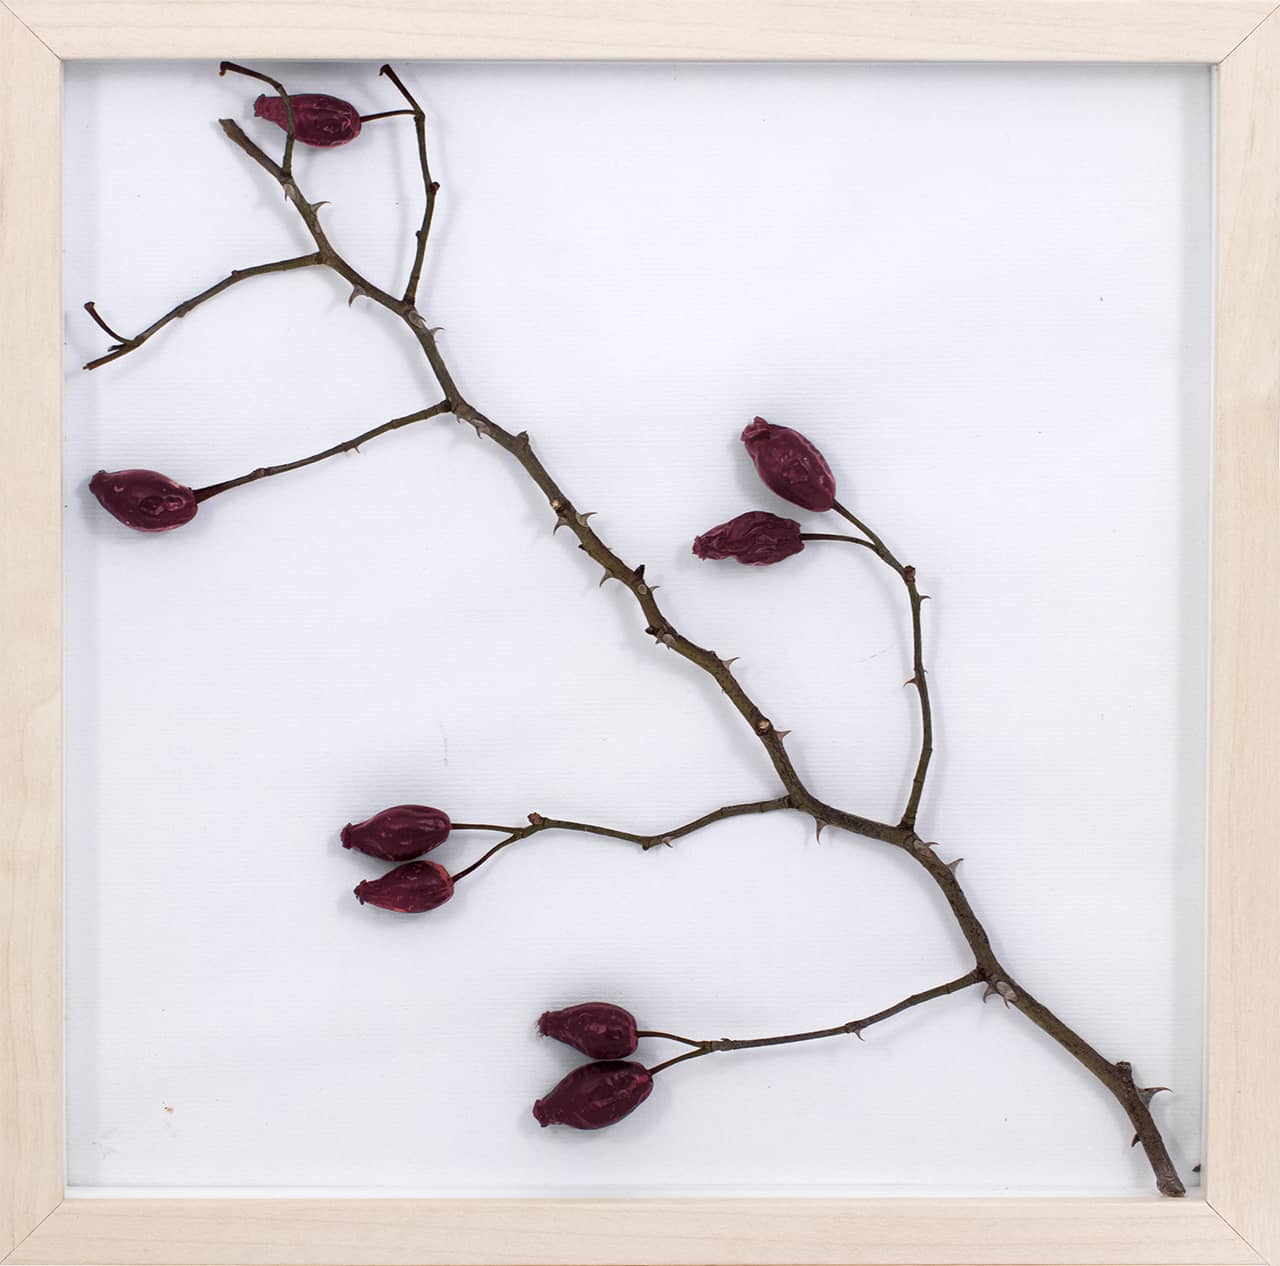 'Rosa Canina', assemblage (wild rose plant and organic pigment on paper, framed). Artwork by Francesca Virginia Coppola